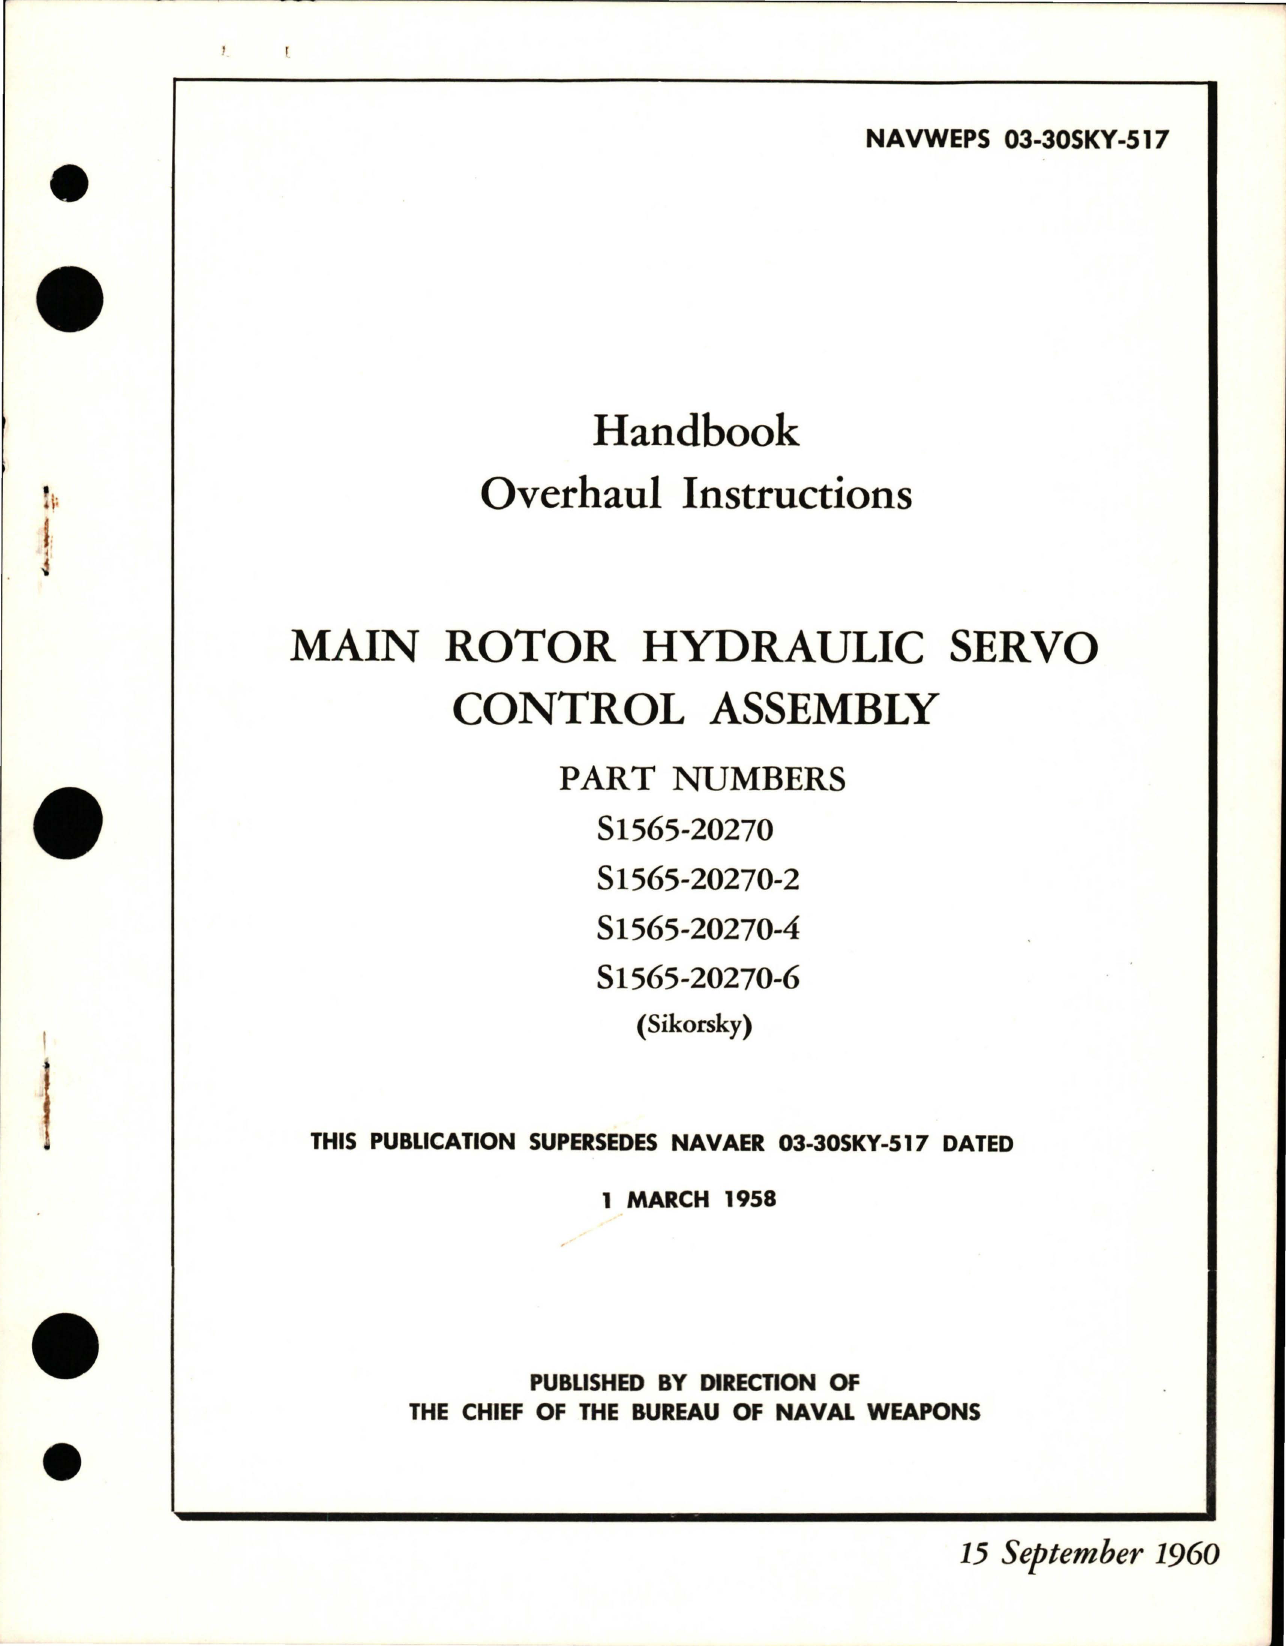 Sample page 1 from AirCorps Library document: Overhaul Instructions for Main Rotor Hydraulic Servo Control Assembly - Parts S1565-20270, S1565-20270-2, S1565-20270-4, and S1565-20270-6